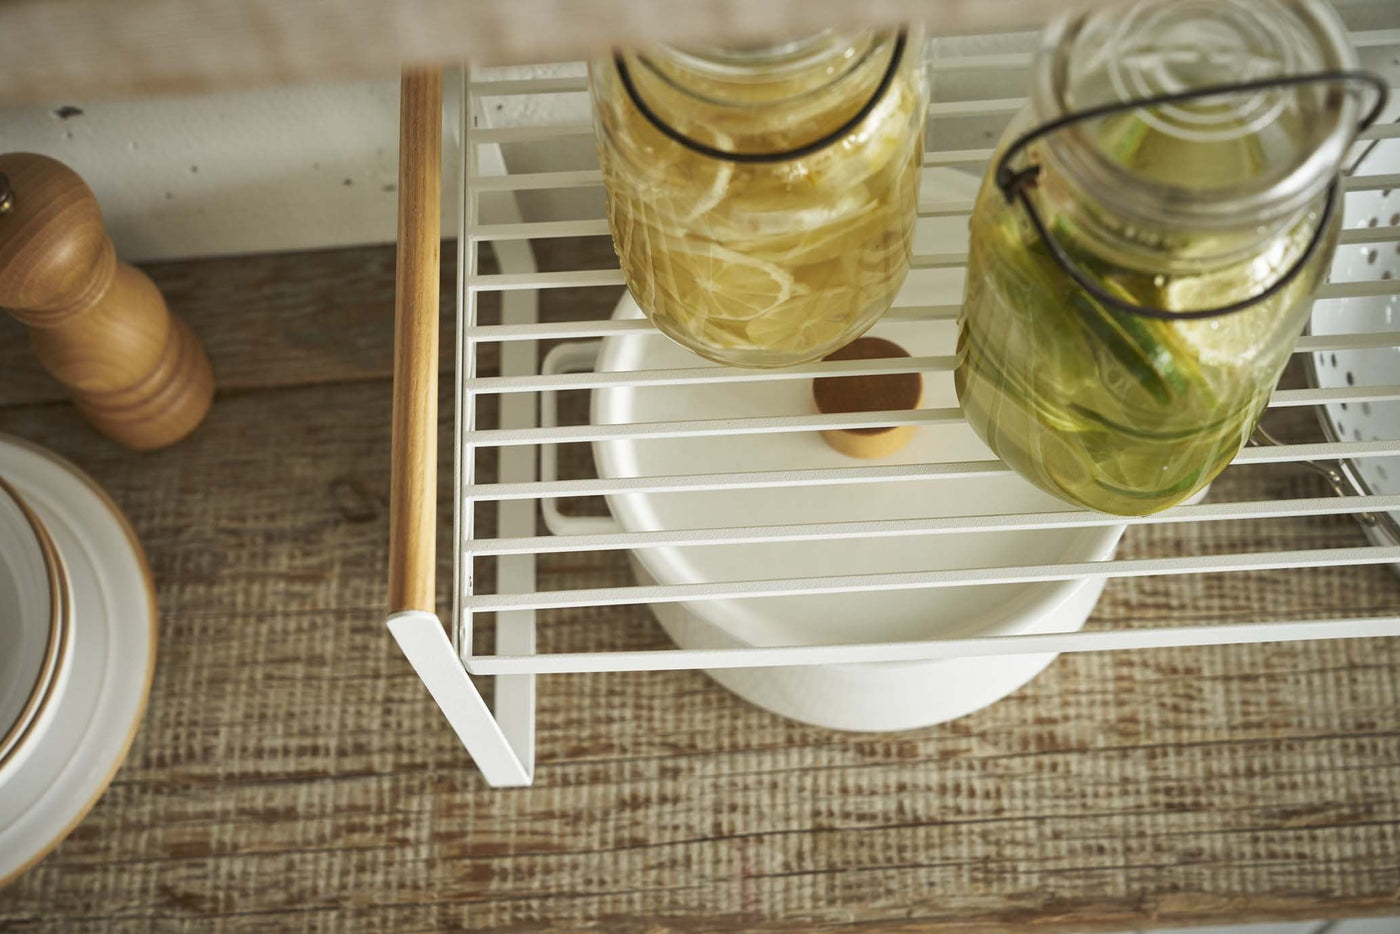 Yamazaki Tosca Small White Wood-Top Stackable Kitchen Rack + Reviews